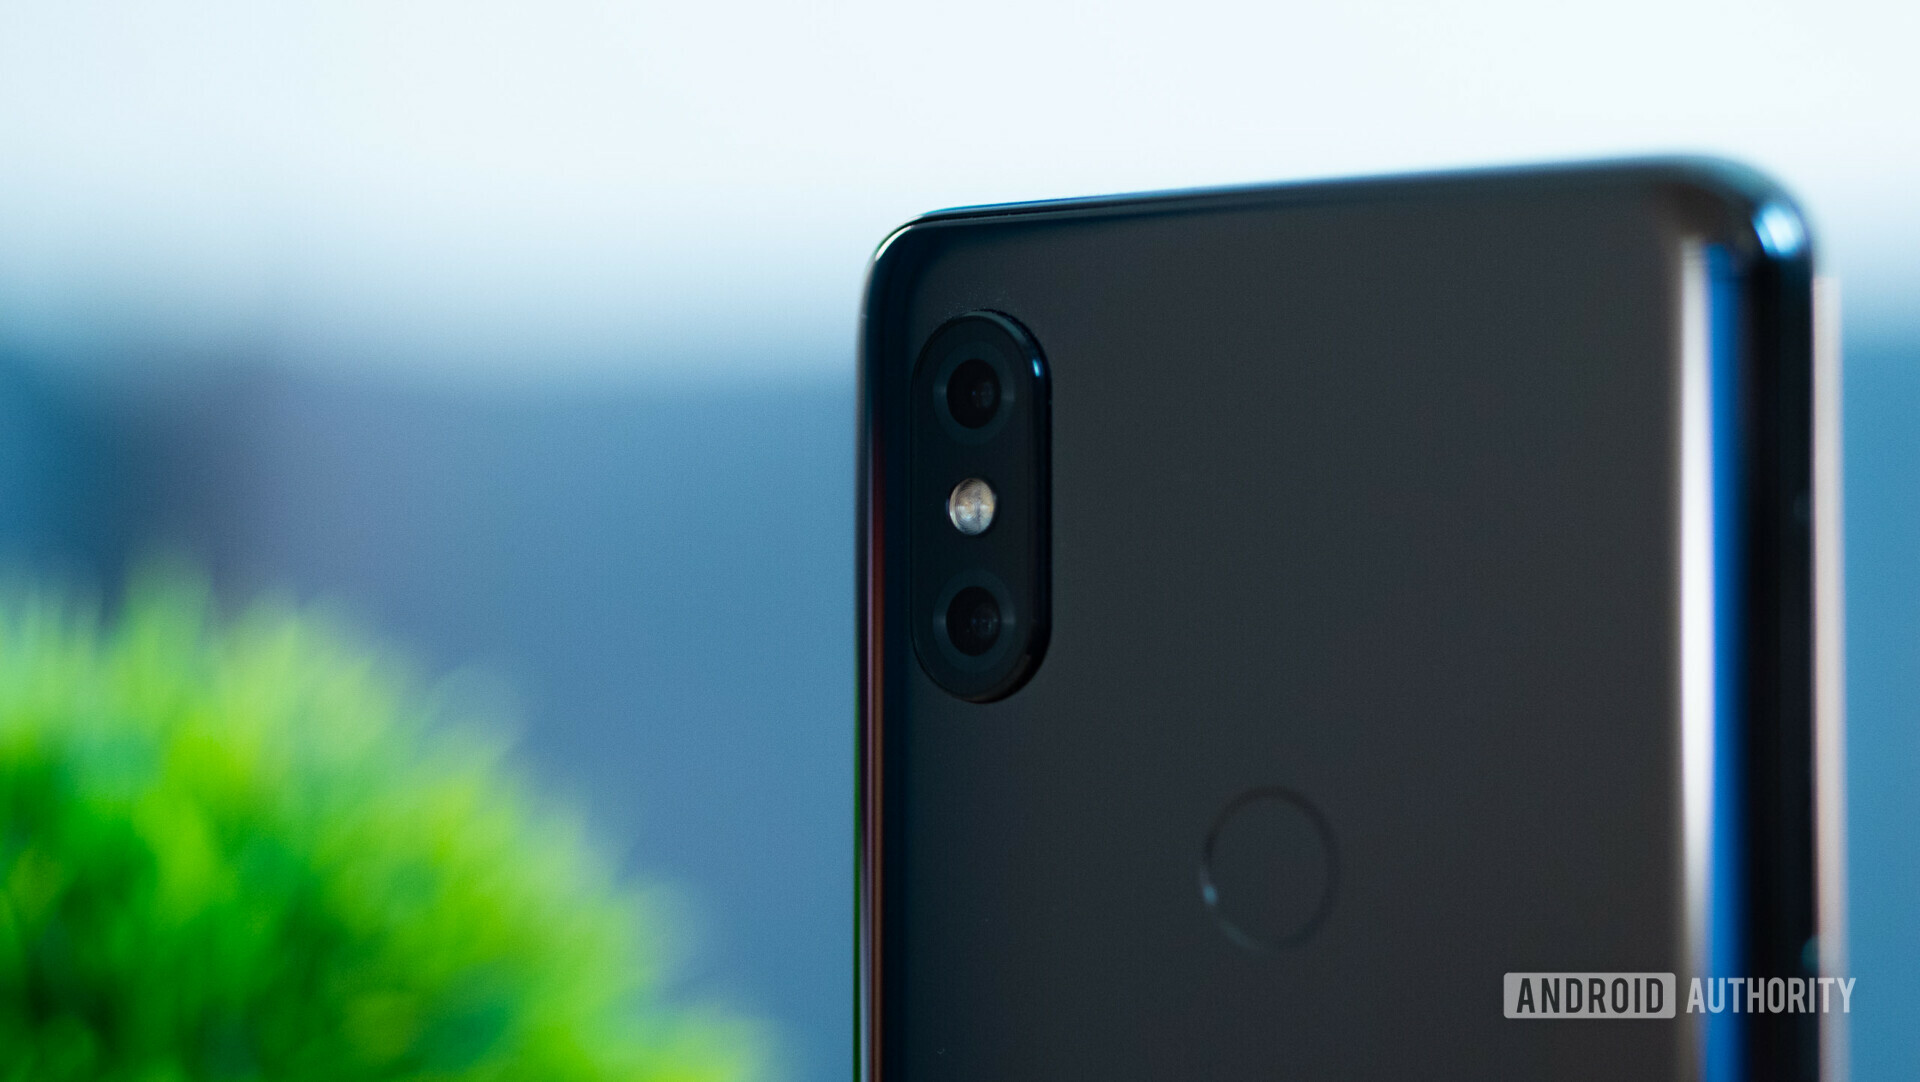 Backside of the Xiaomi Mi Mix 3 showing the cameras.